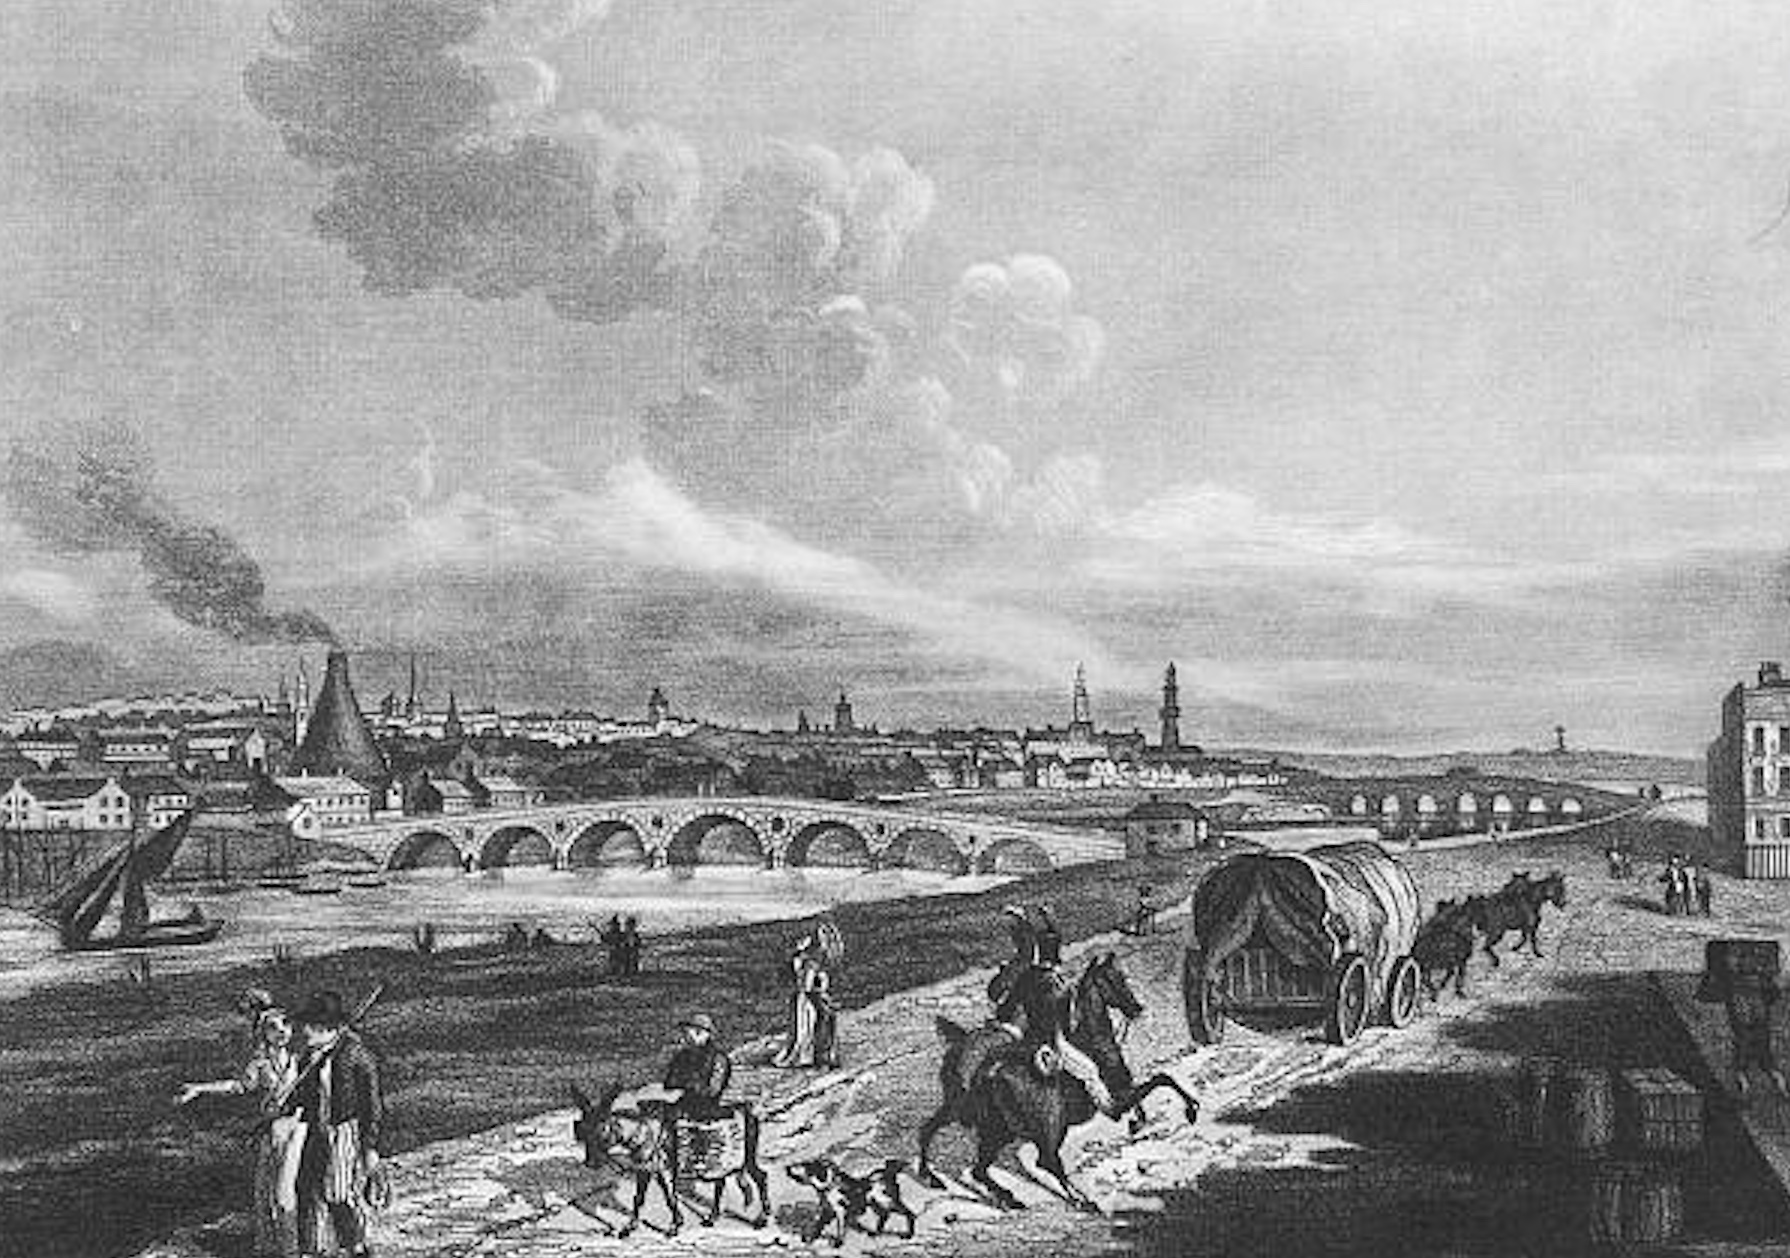 Banks of the Clyde, Glasgow, 1817